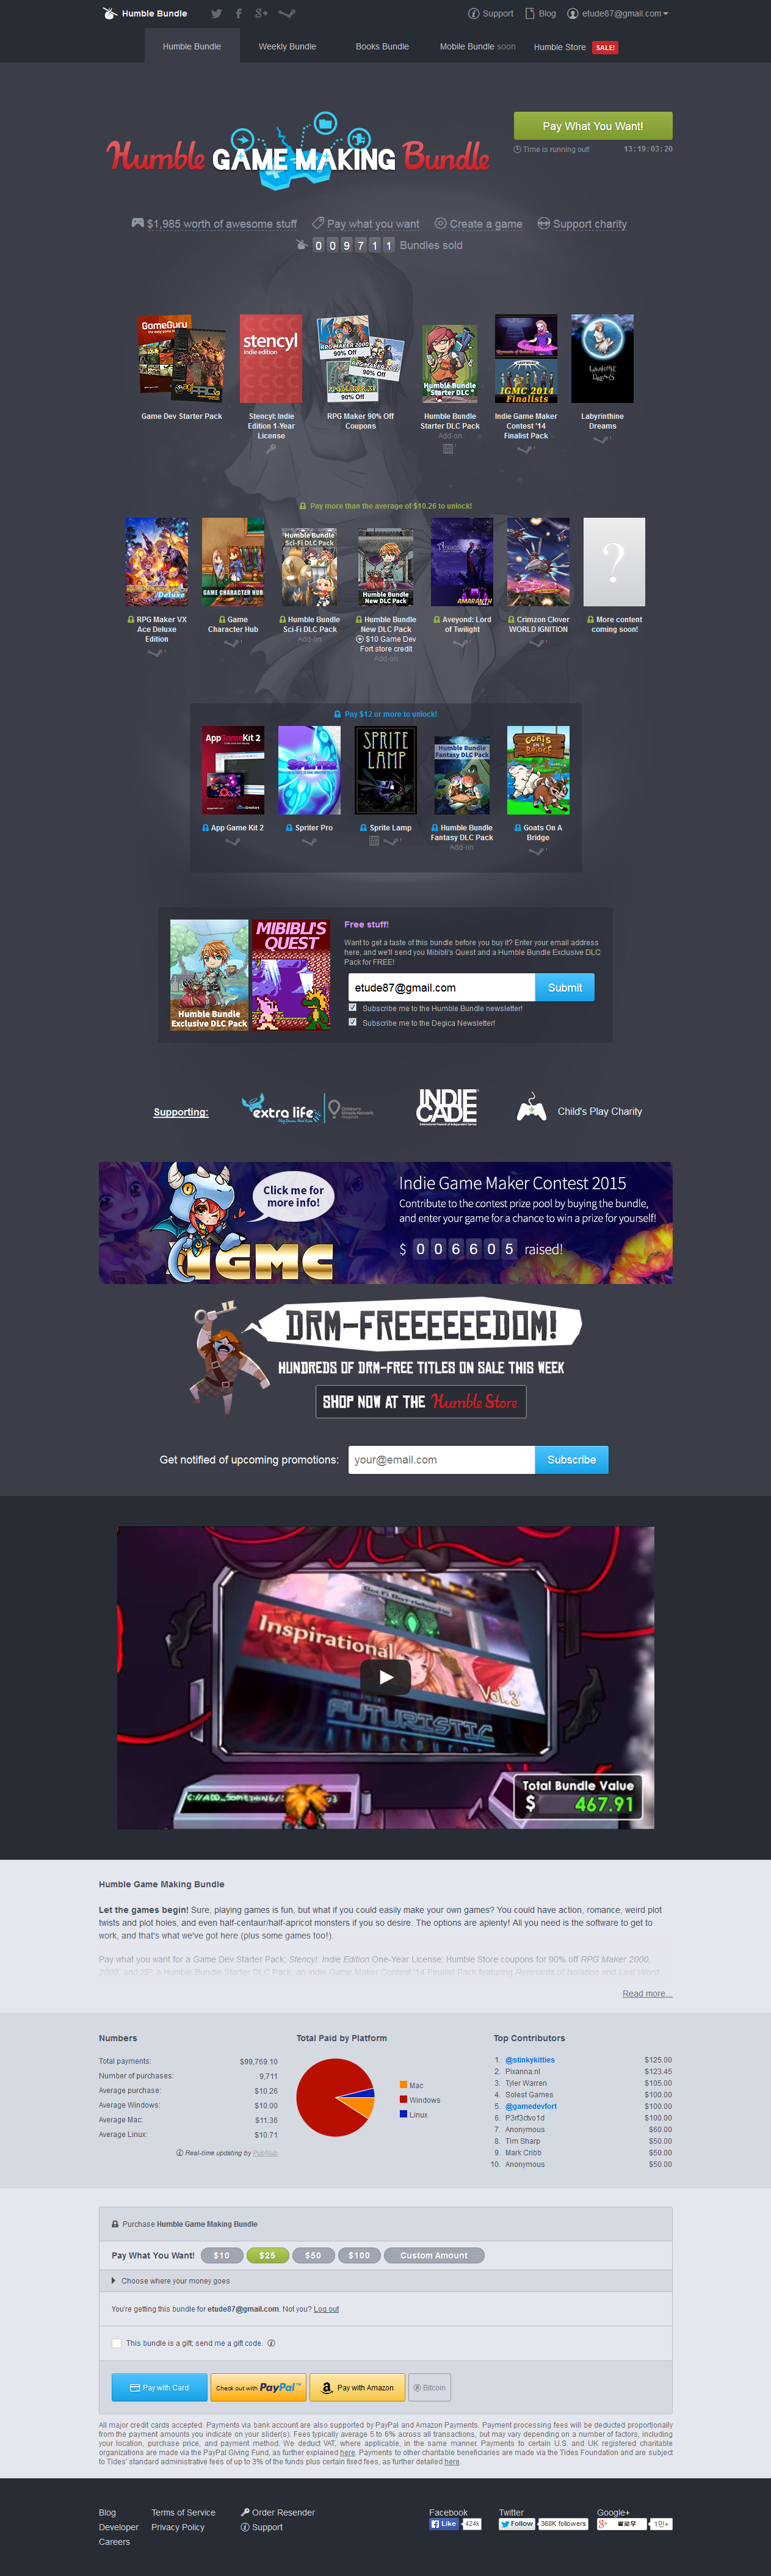 Cap 2015-07-08 07-56-40-Humble Game Making Bundle (pay what you want and help charity).png